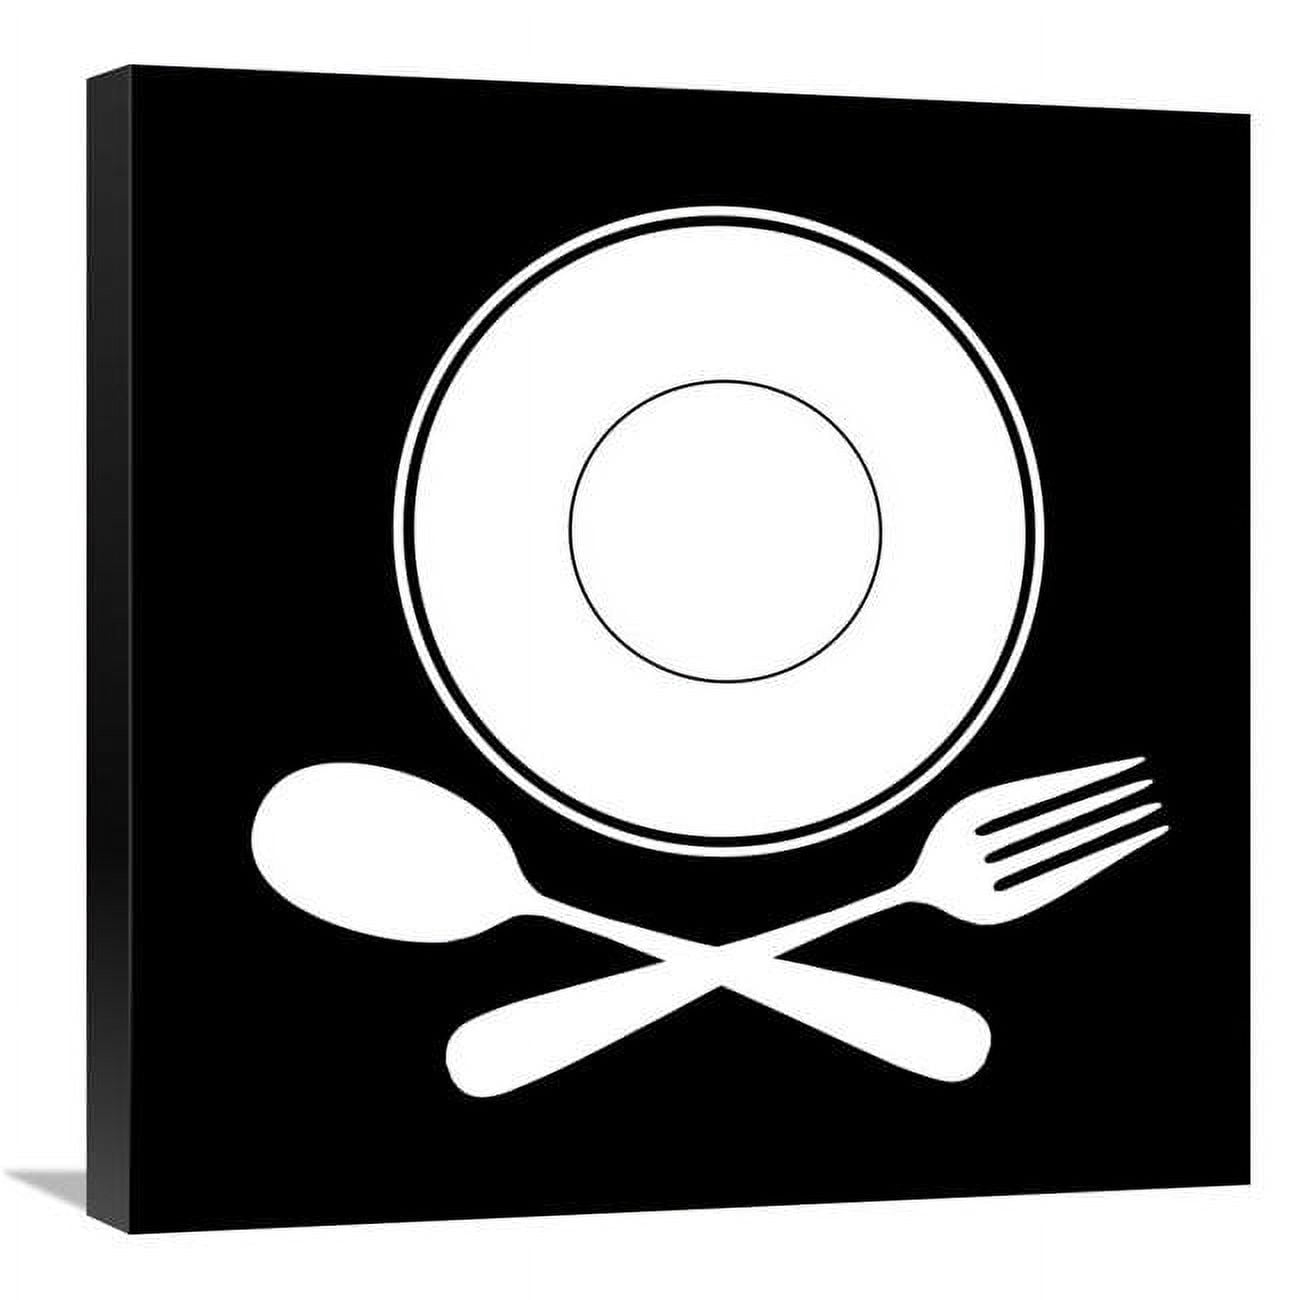 JensenDistributionServices 24 x 24 in. Mealtime - White on Black - Plate with Crossed Cutlery Art Print - BG.Studio